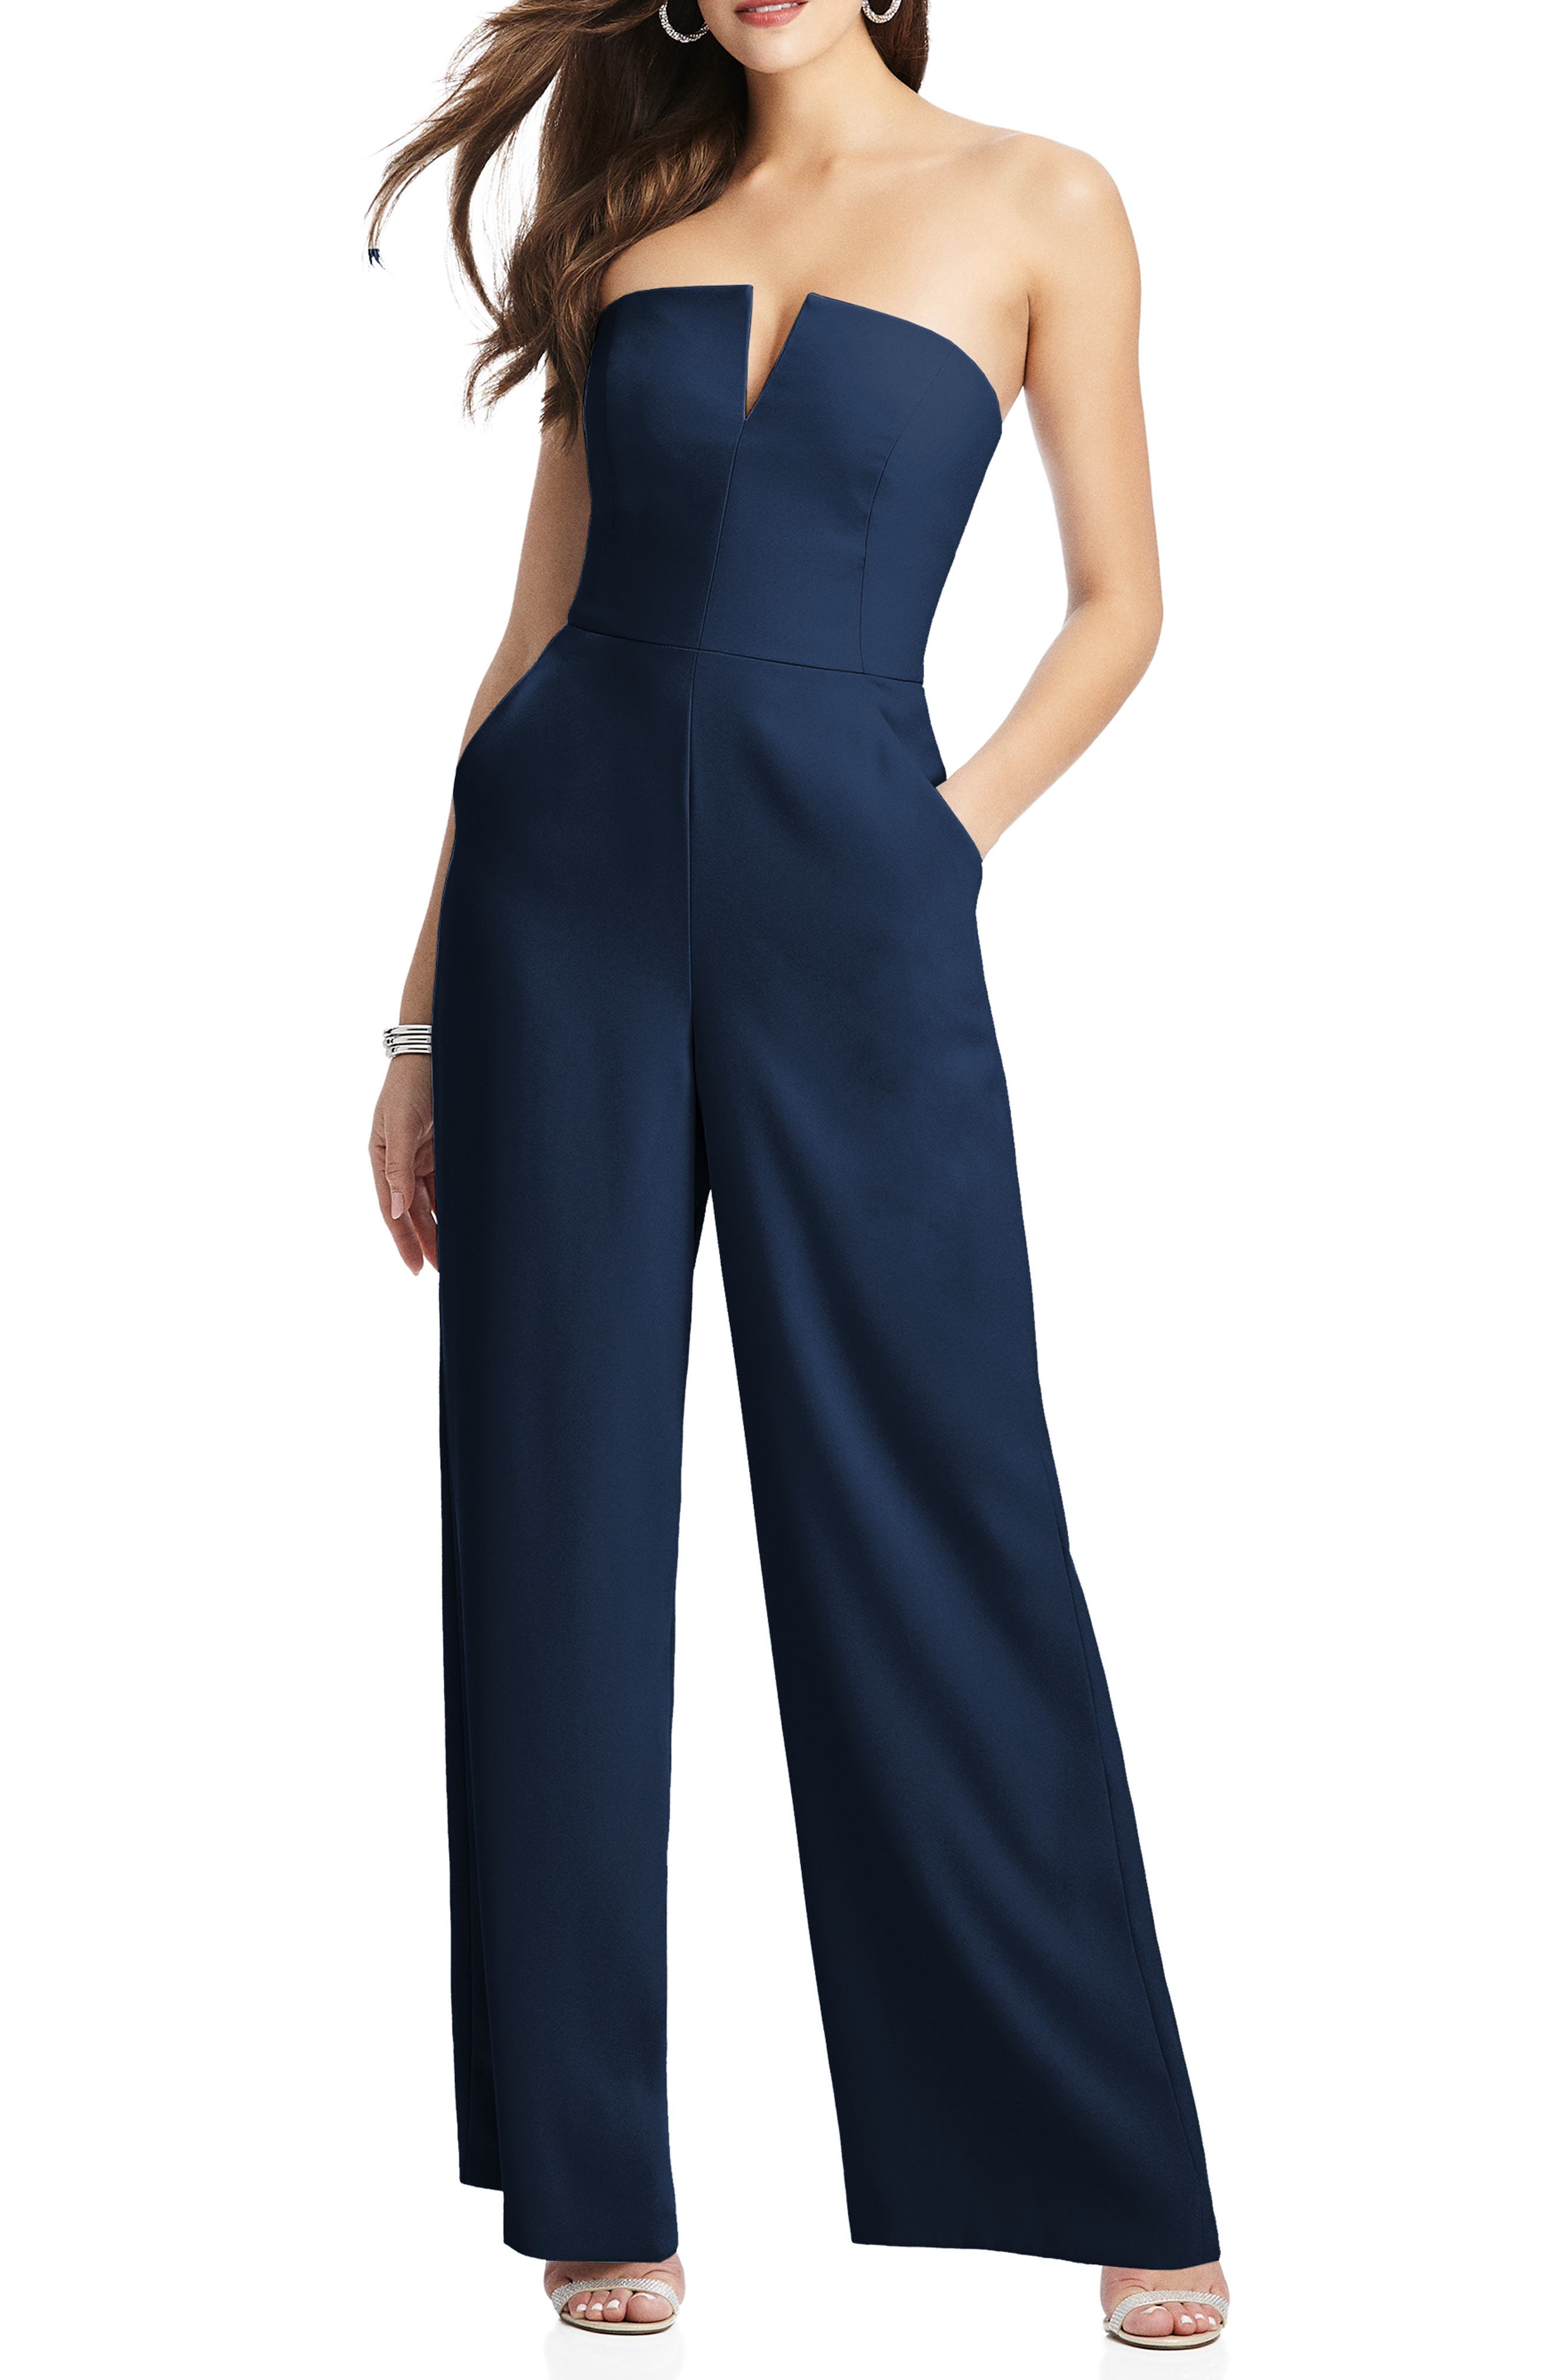 Blue Jumpsuits ☀ Rompers for Women ...